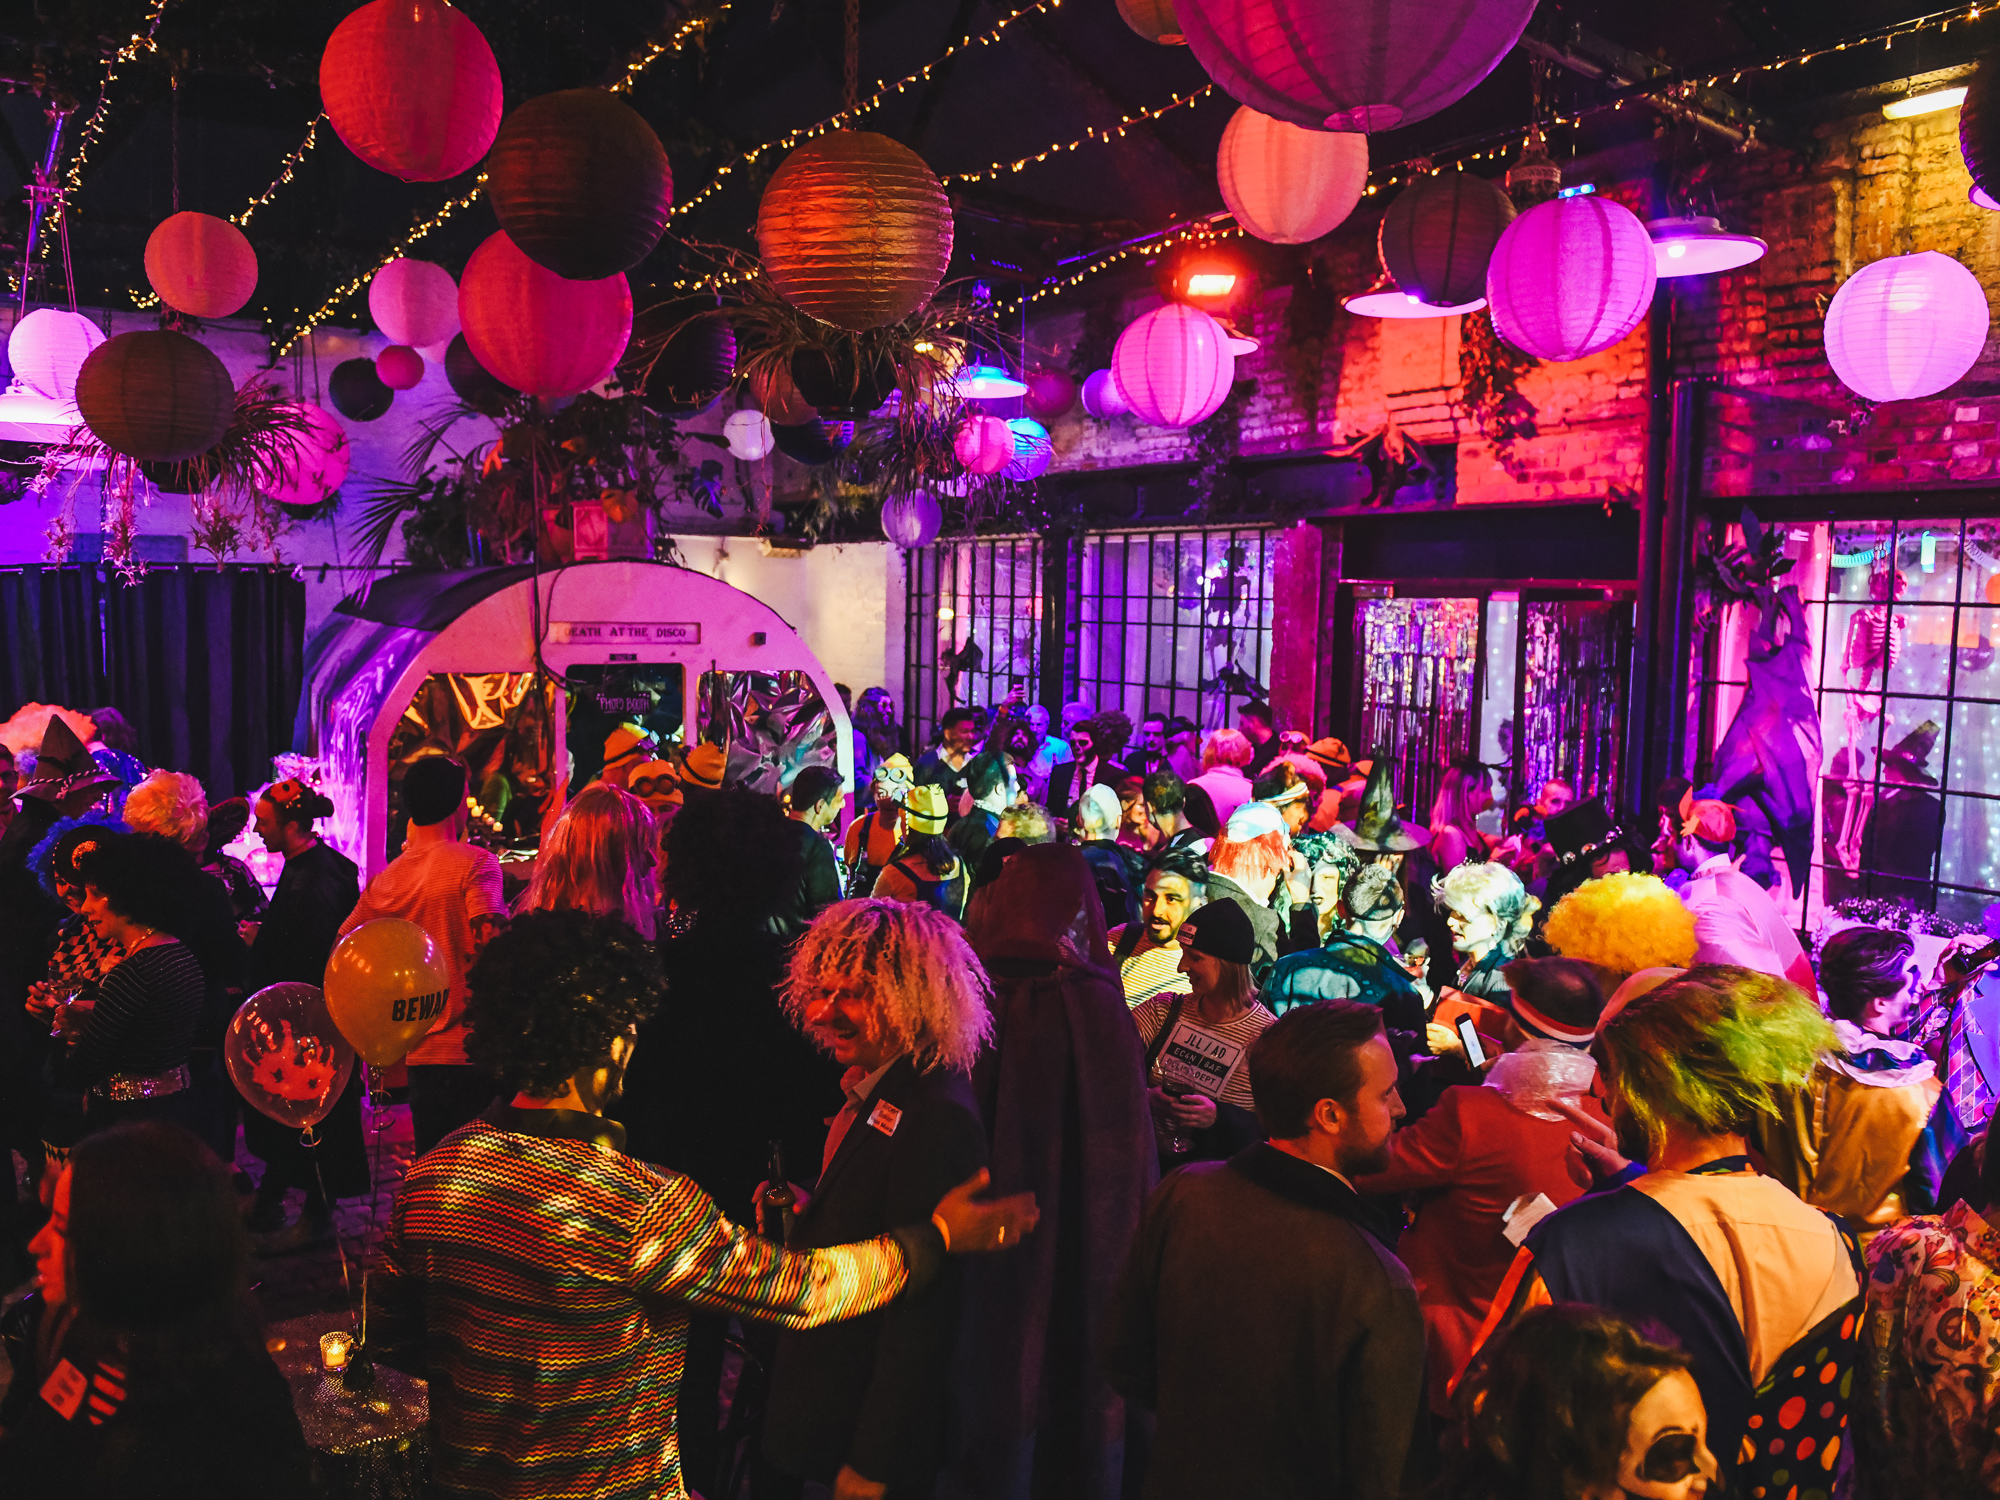 A bustling Halloween party scene with guests in various colorful costumes under decorative paper lanterns.